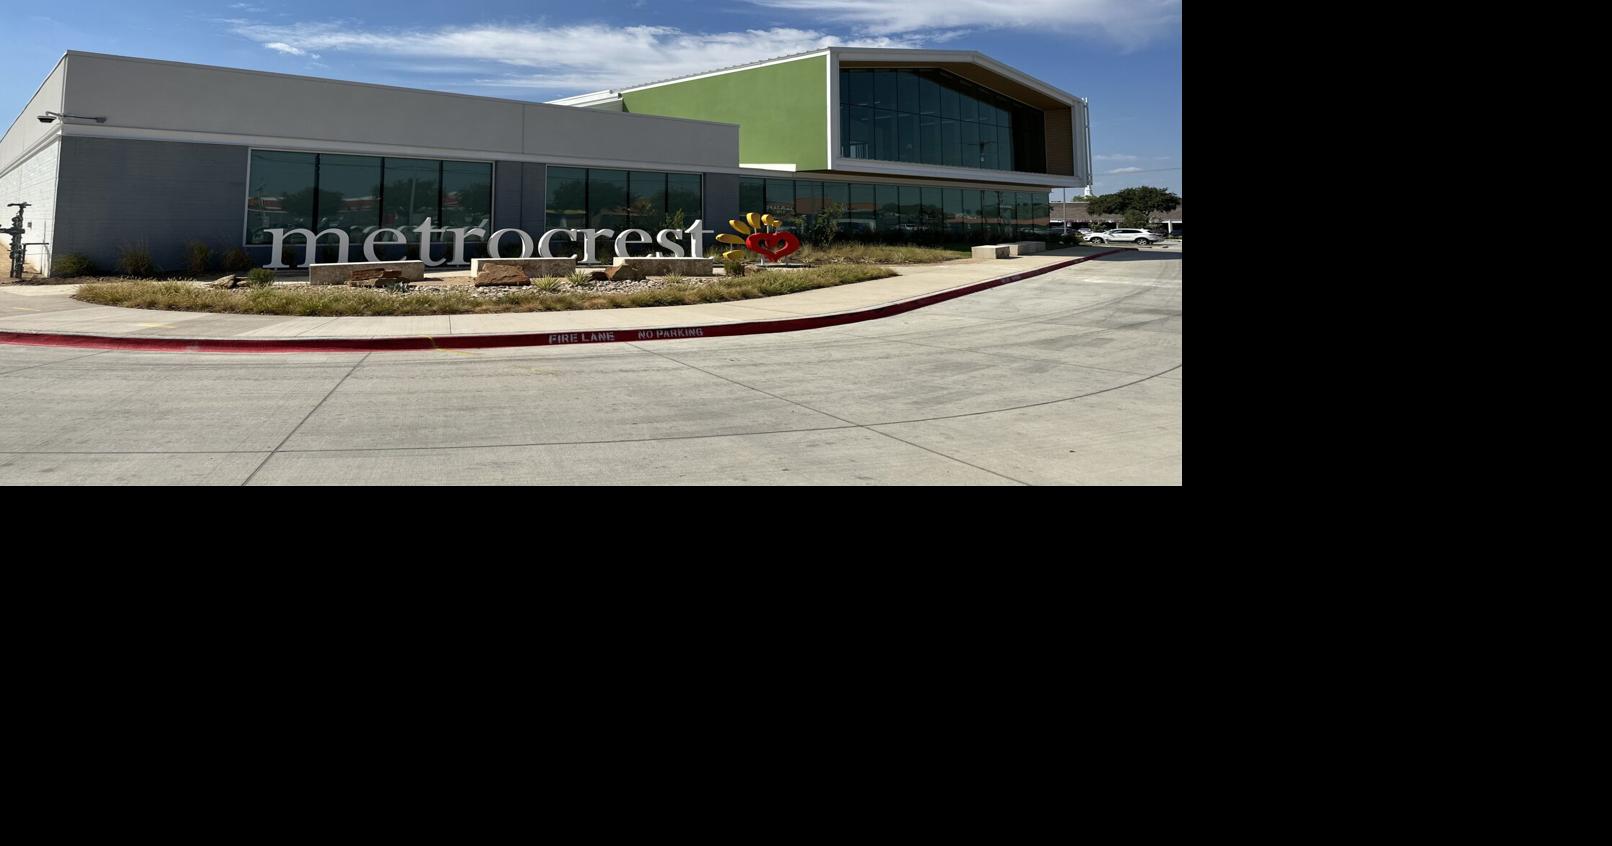 Michaels Unveils Two New Test and Learn Concept Stores in Texas